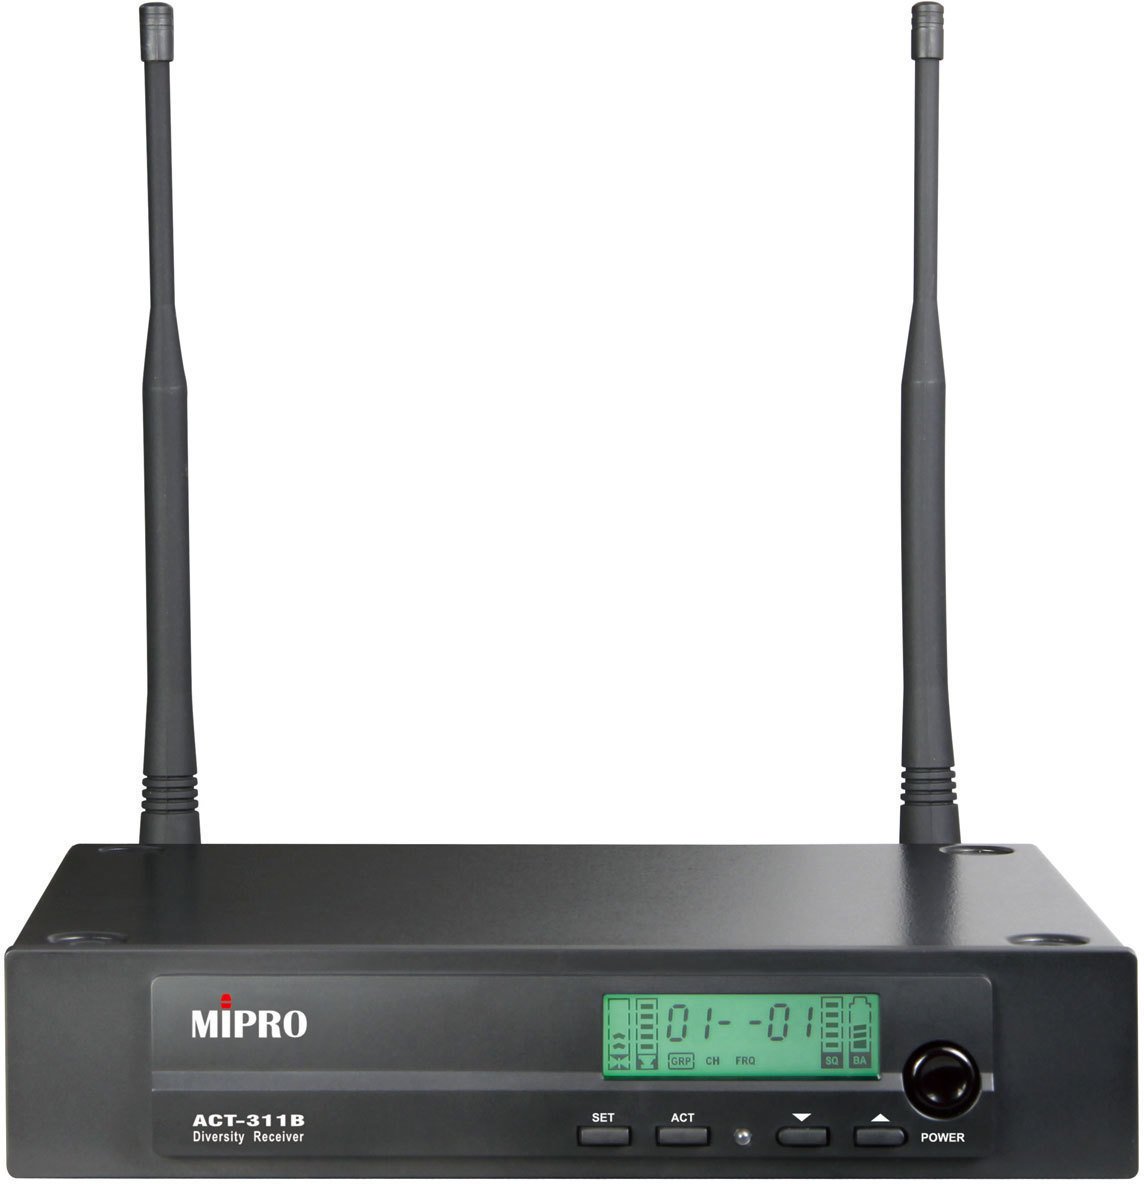 Receiver for wireless systems MiPro ACT-311B